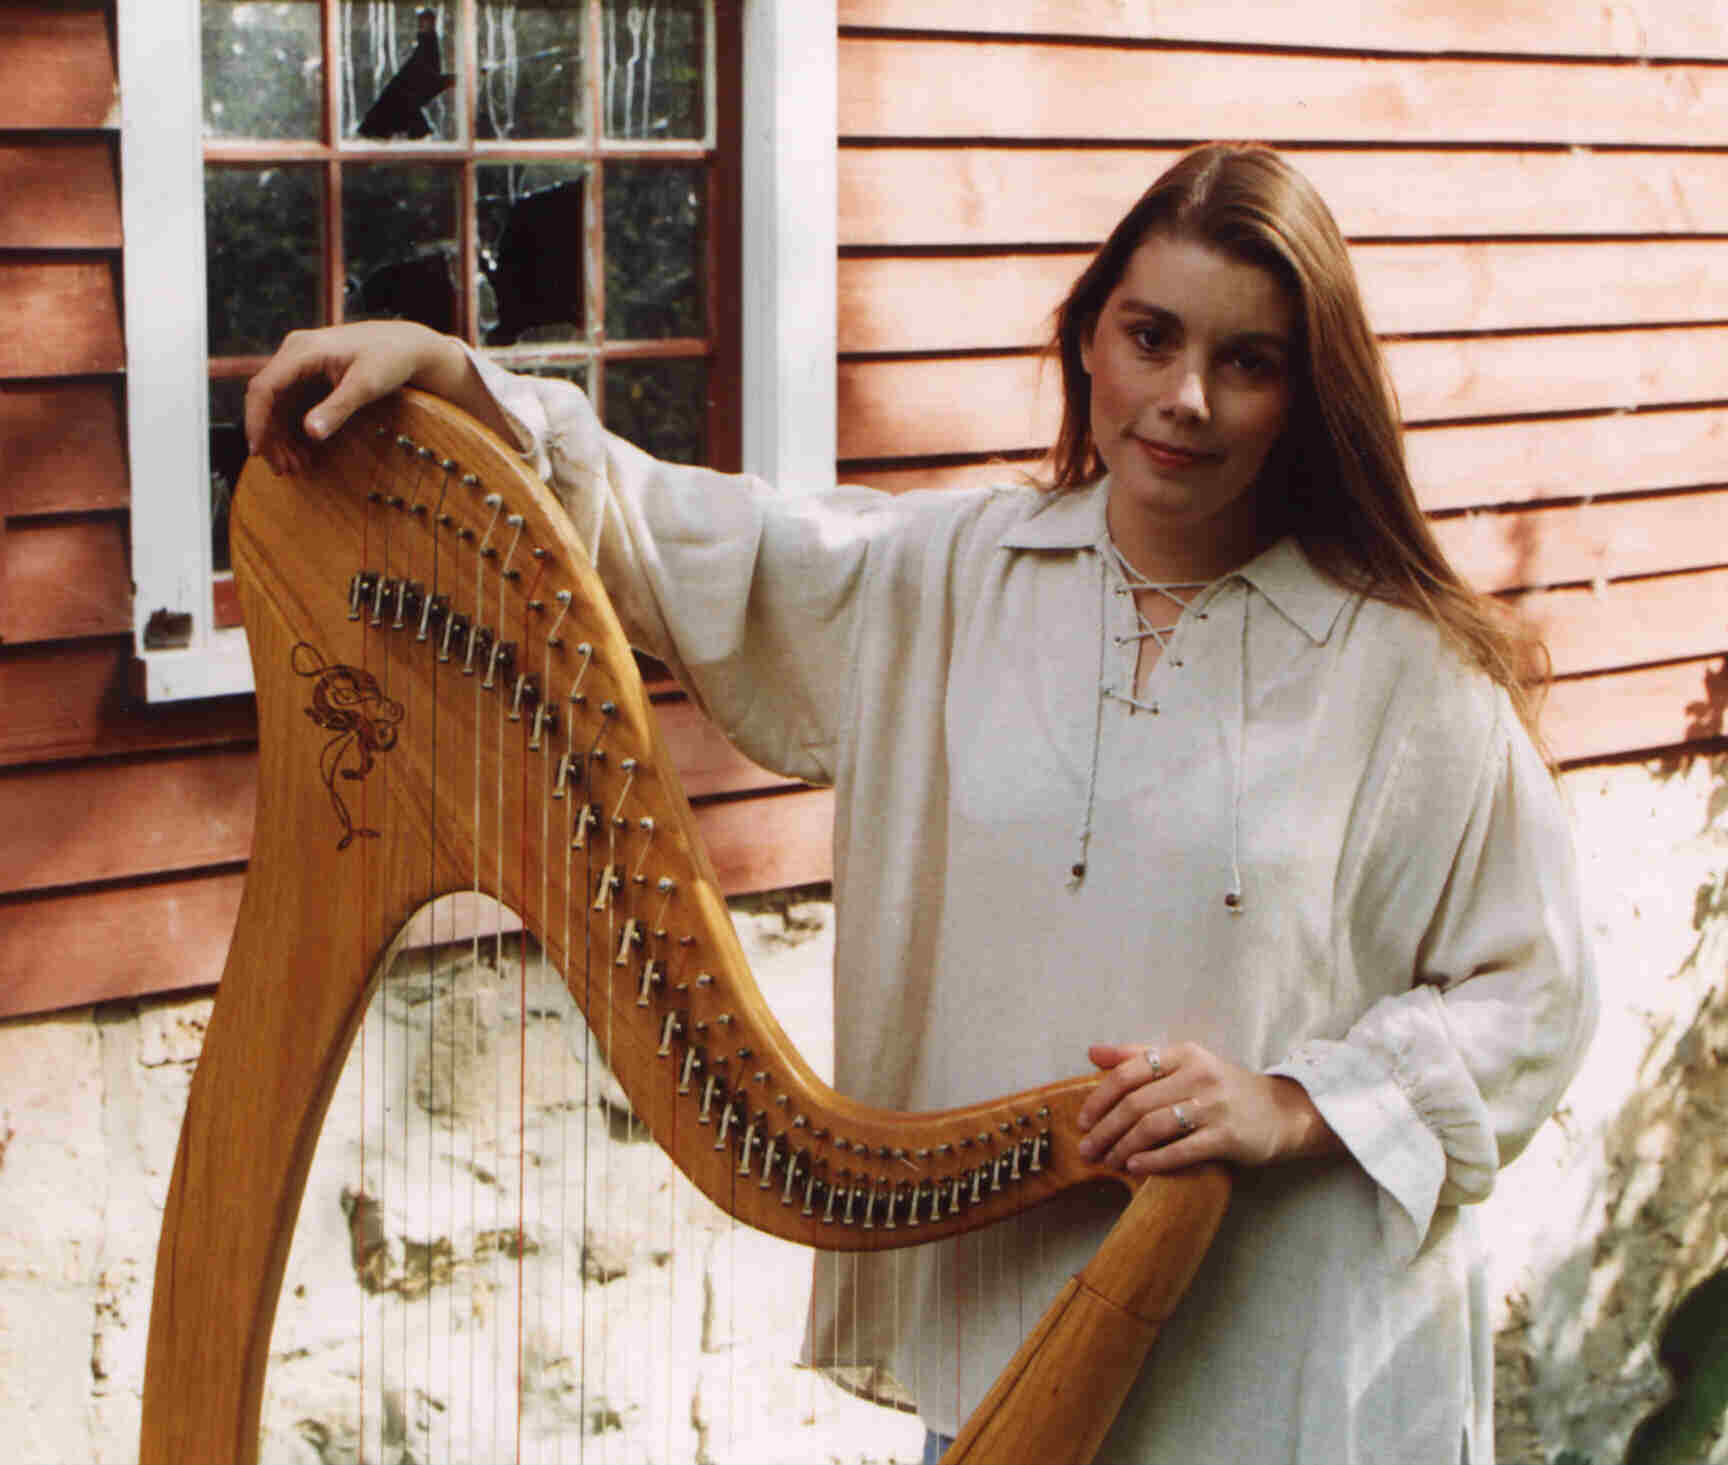 Jennifer and her harp, in front a window of the old mill in Otterville, Ontario, Canada